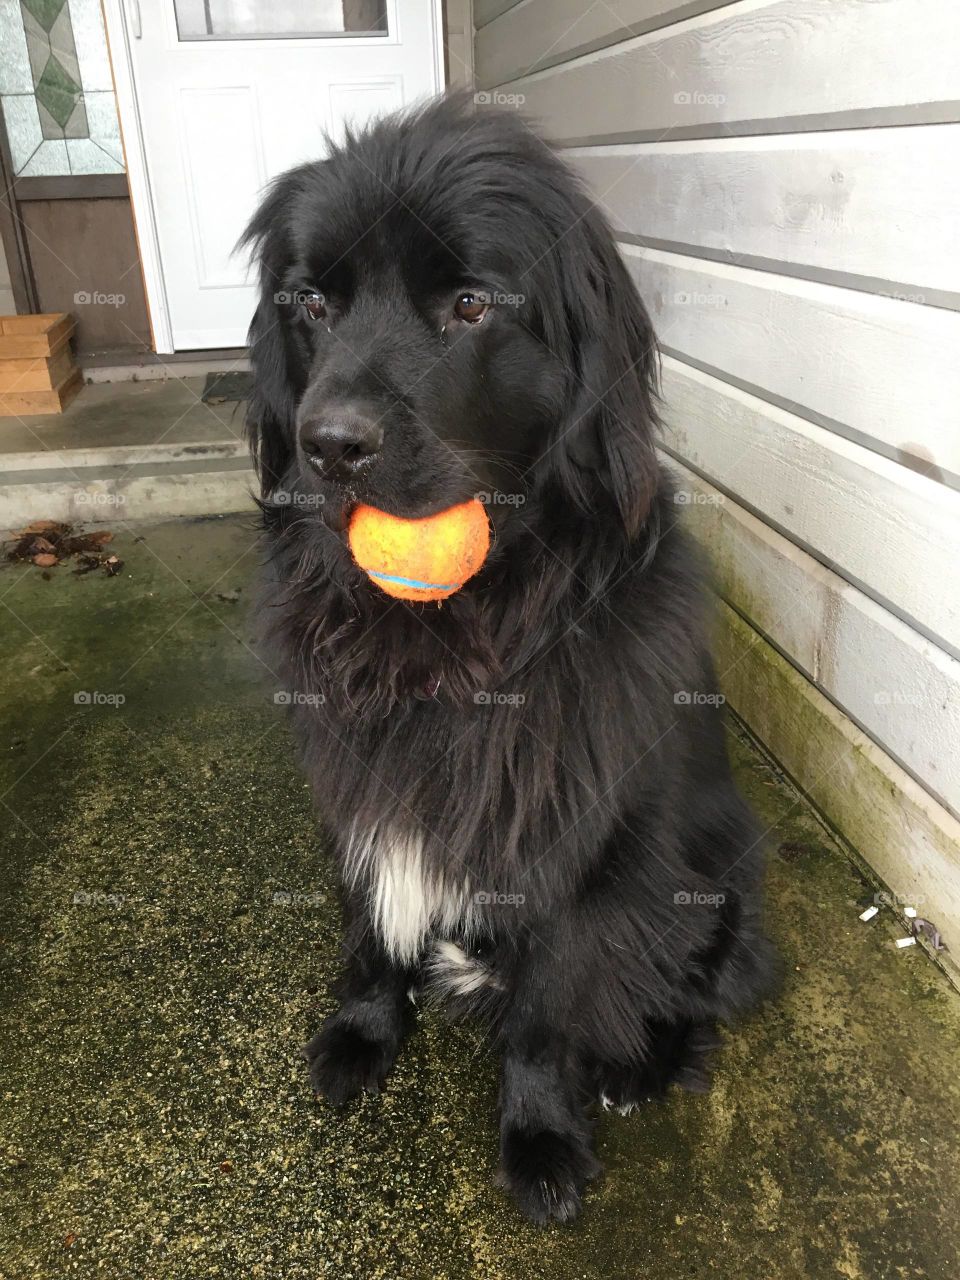 A dog and his Ball